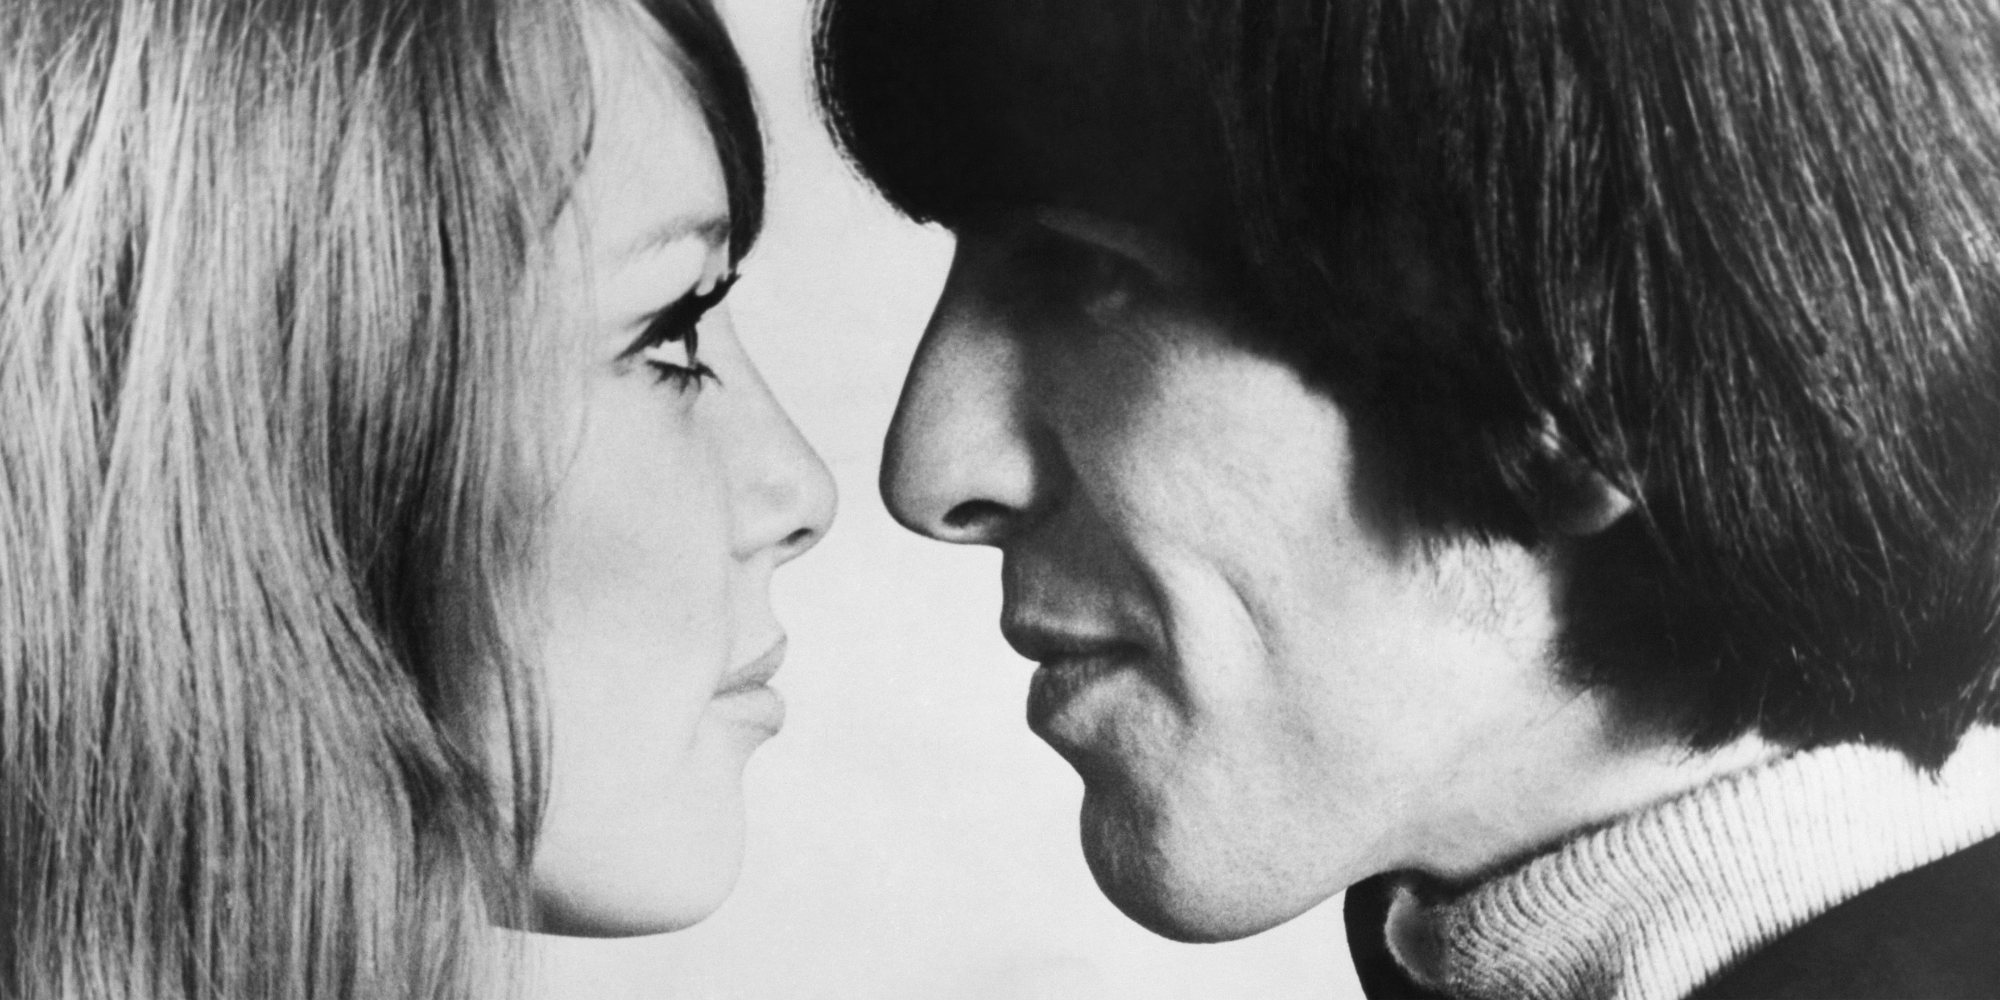 The Beatles: Pattie Boyd Said Her Wedding to George Harrison Was ‘Not the One I Had Dreamed’